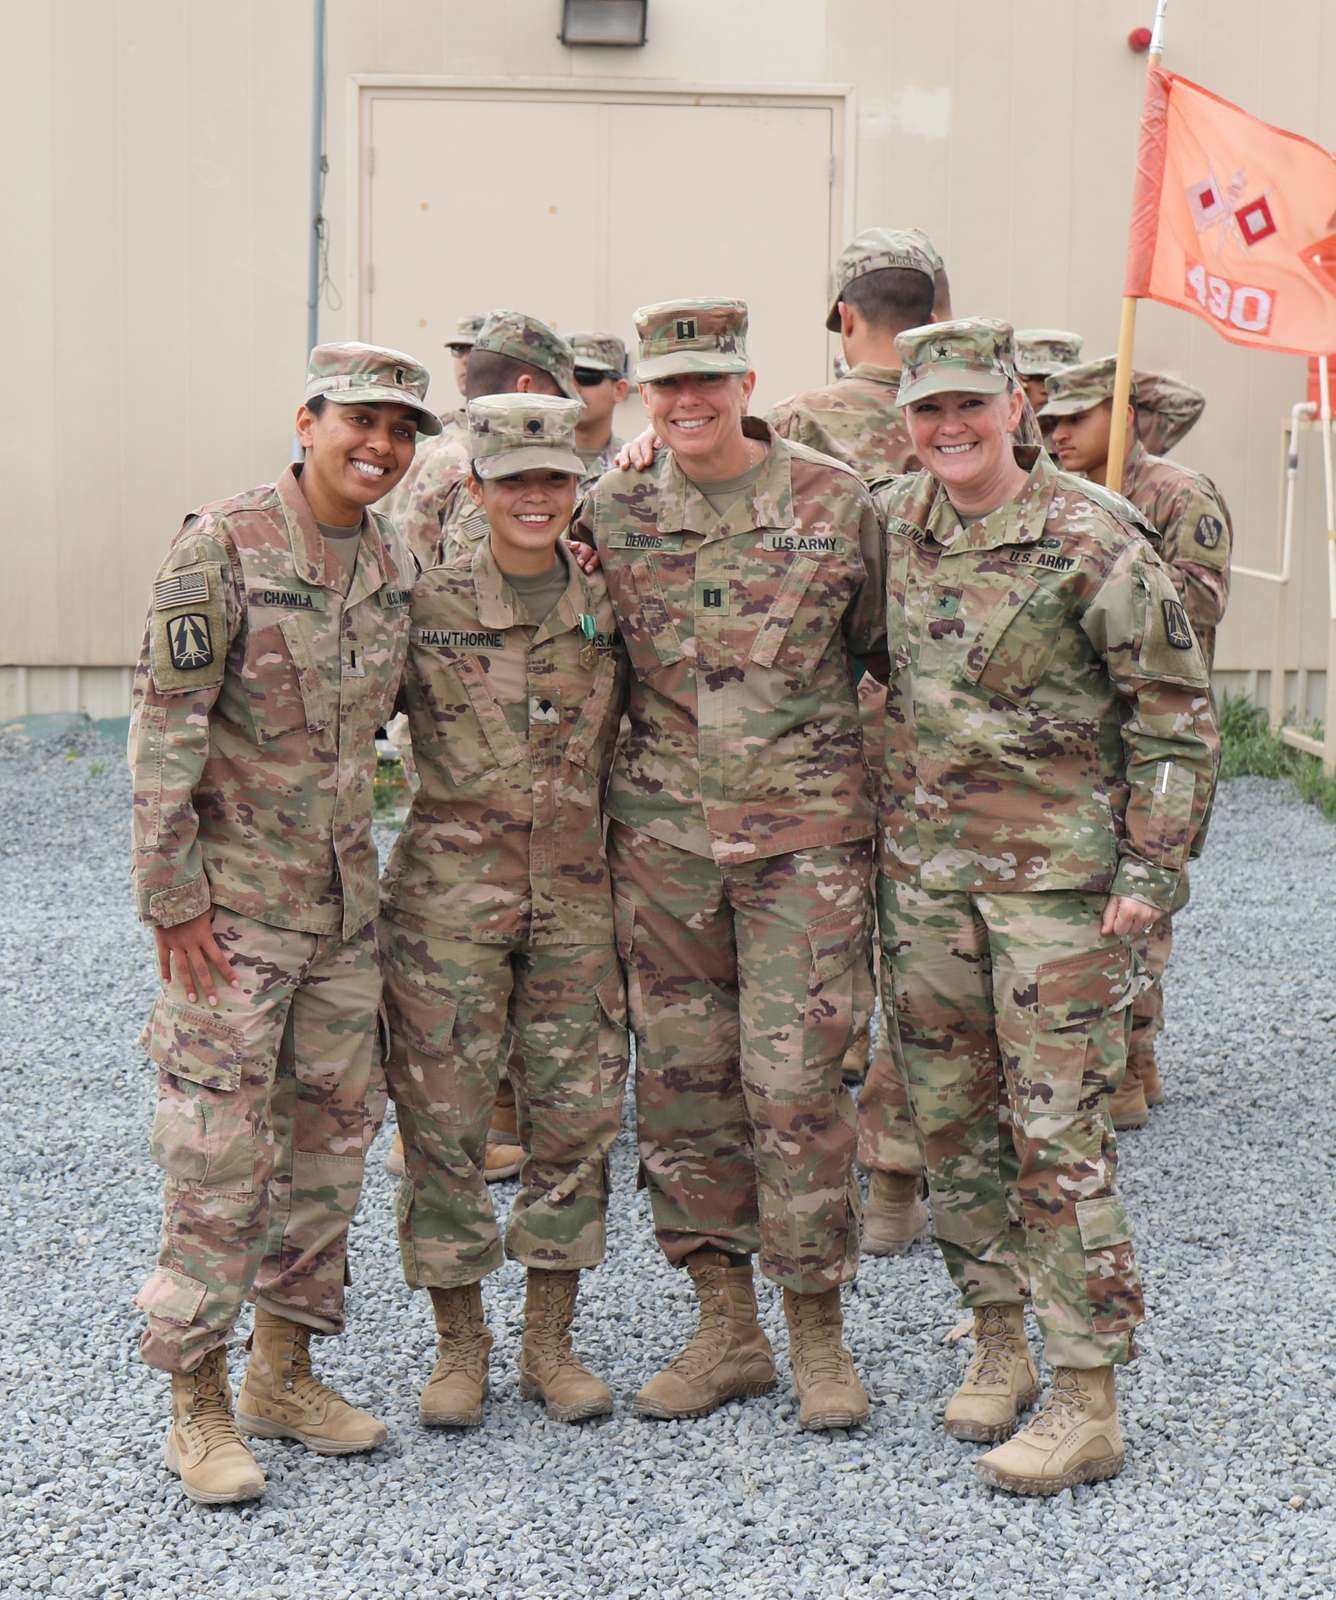 U.S. Army Soldiers pose following the awards ceremony - NARA & DVIDS ...